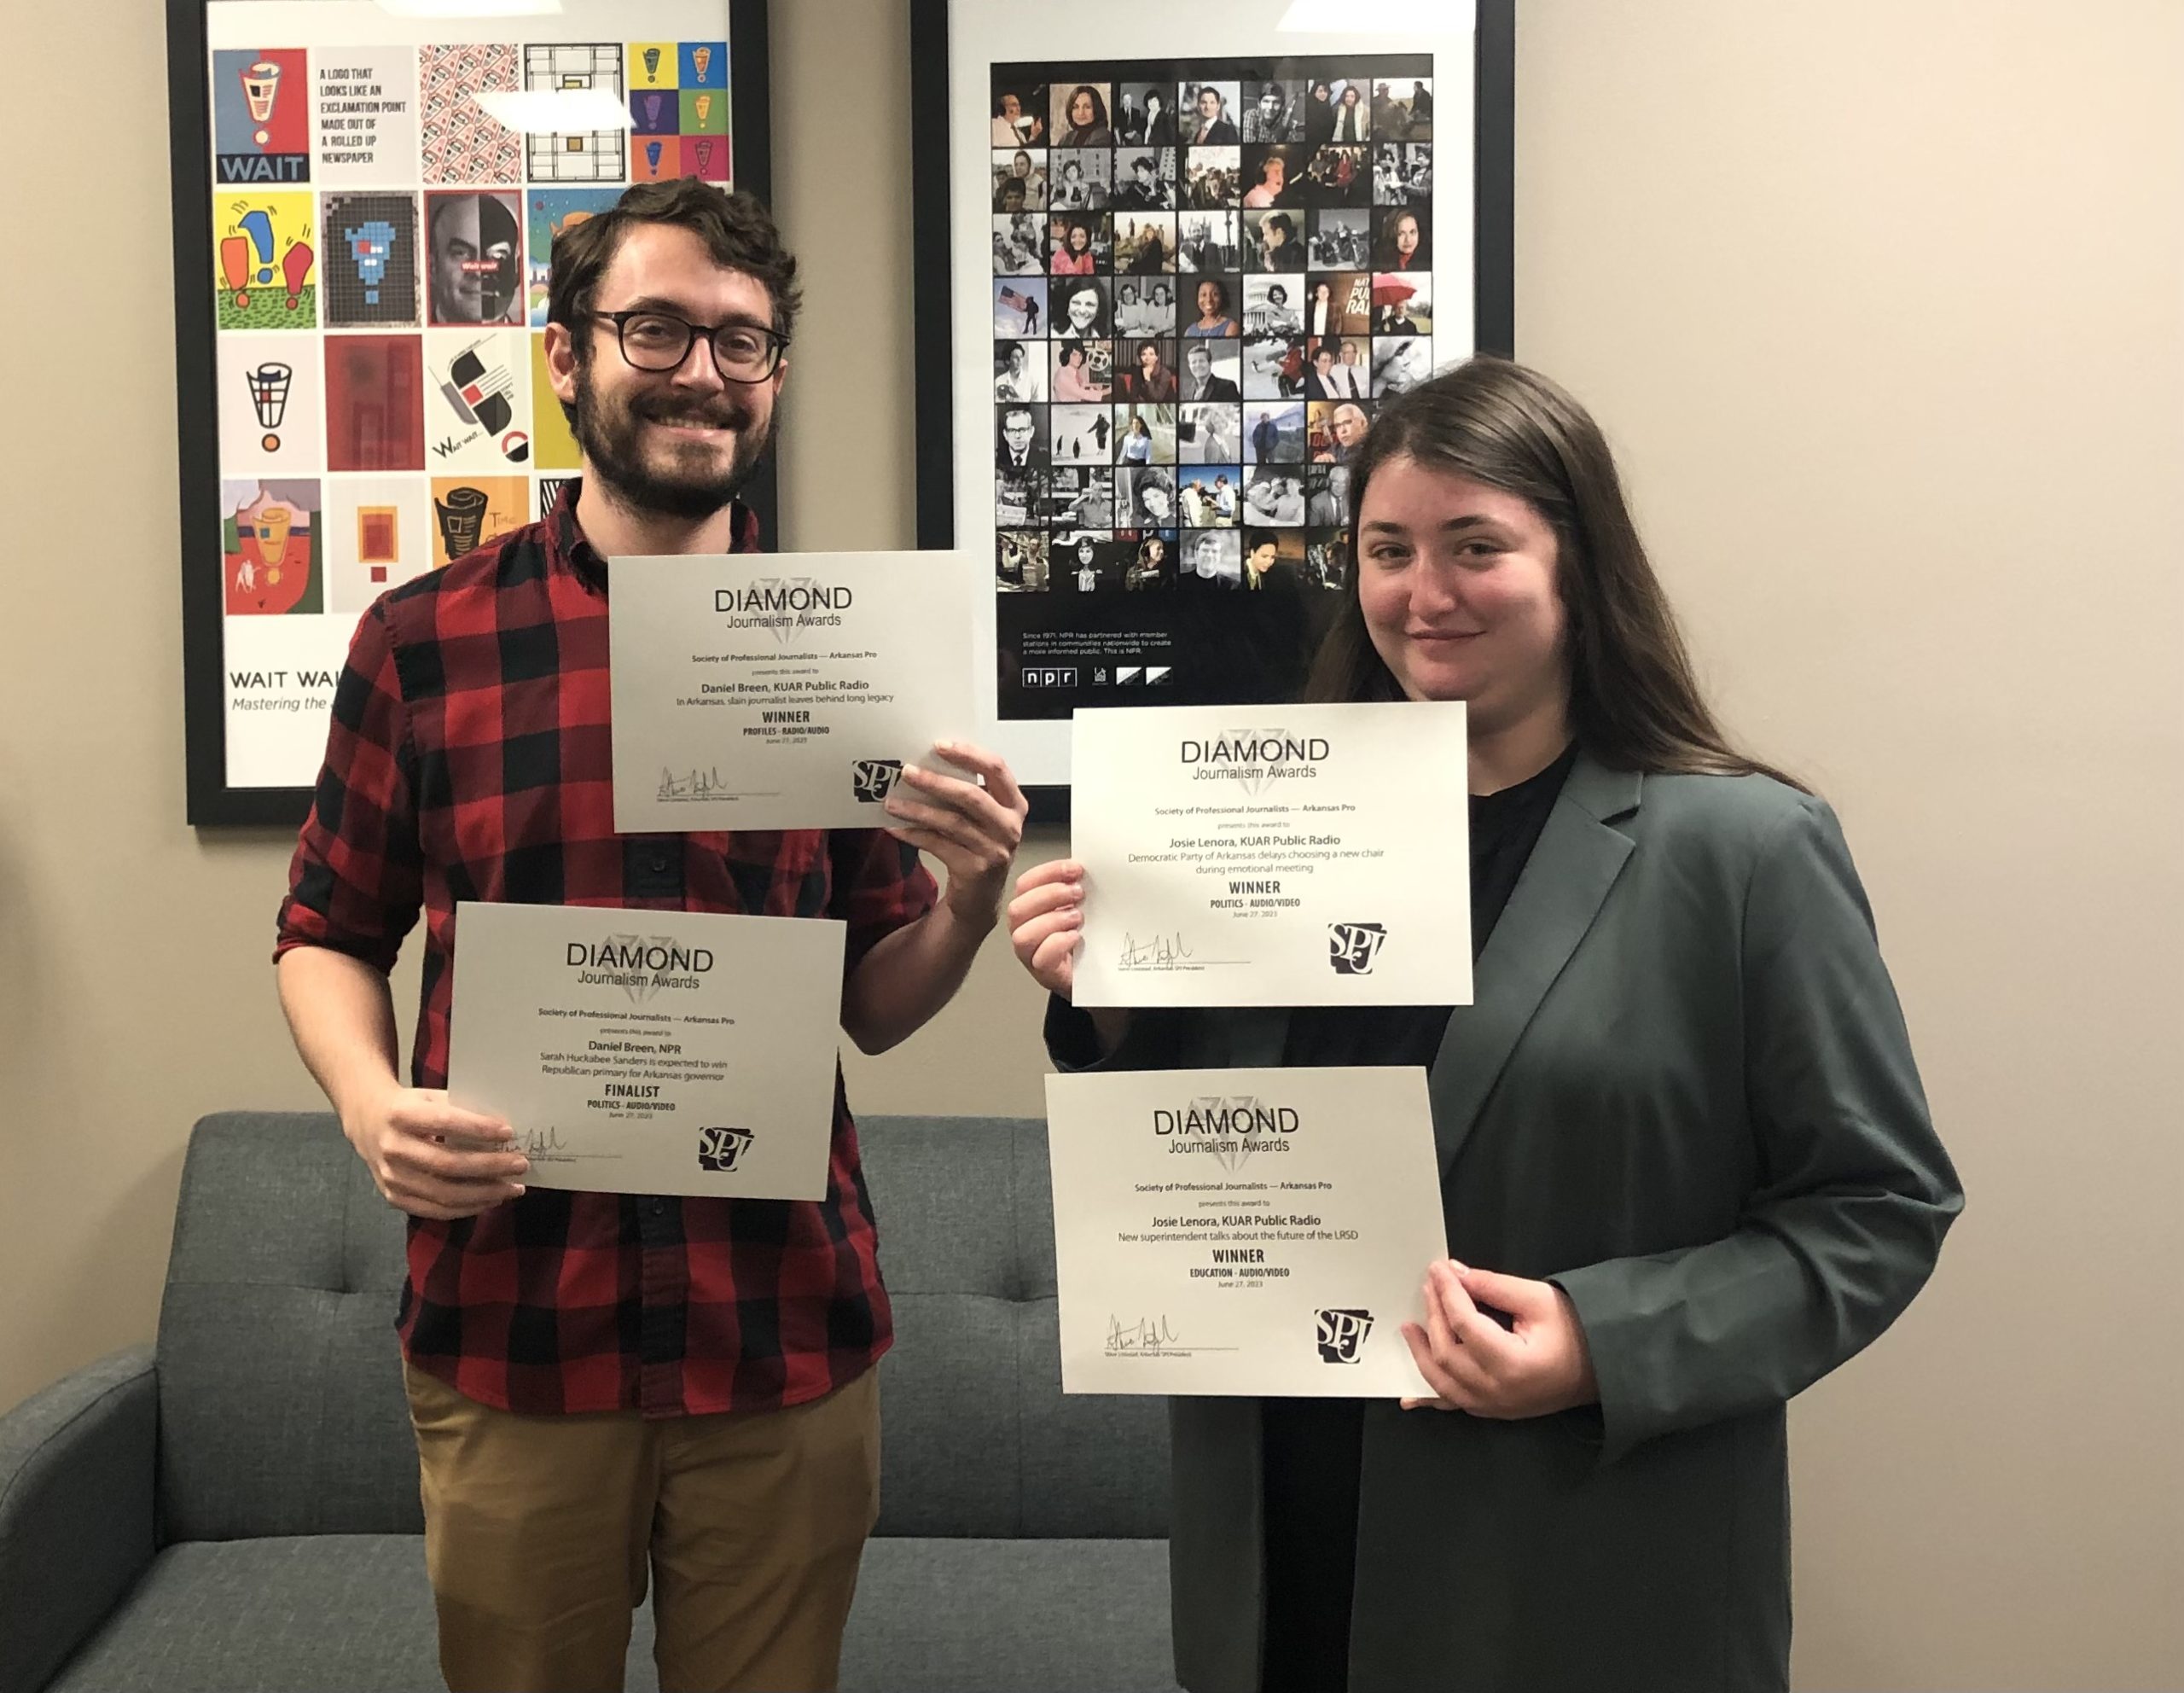 Daniel Breen and Josie Lenora are shown with their awards from the Society of Professional Journalists. Photo by LeRoi Emerson.